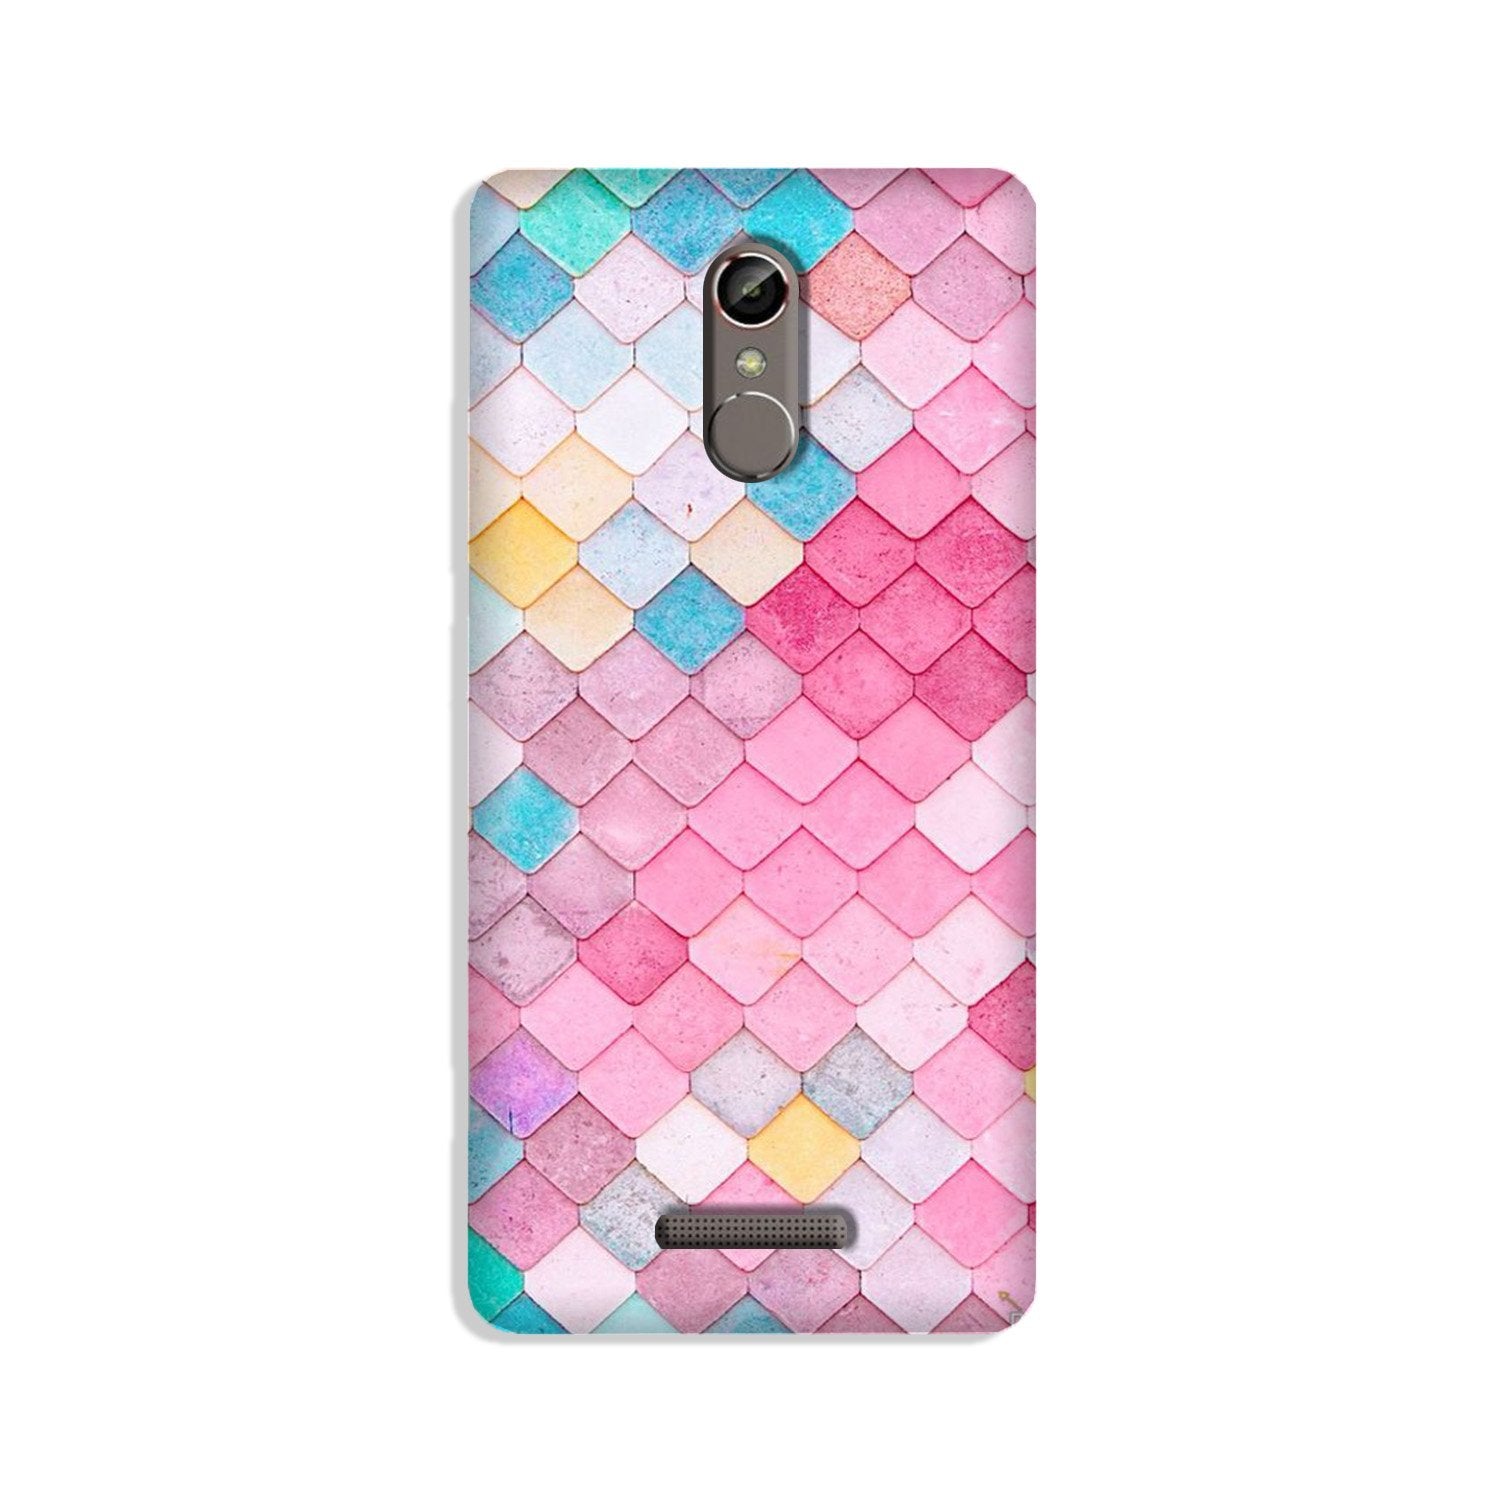 Pink Pattern Case for Gionee S6s (Design No. 215)